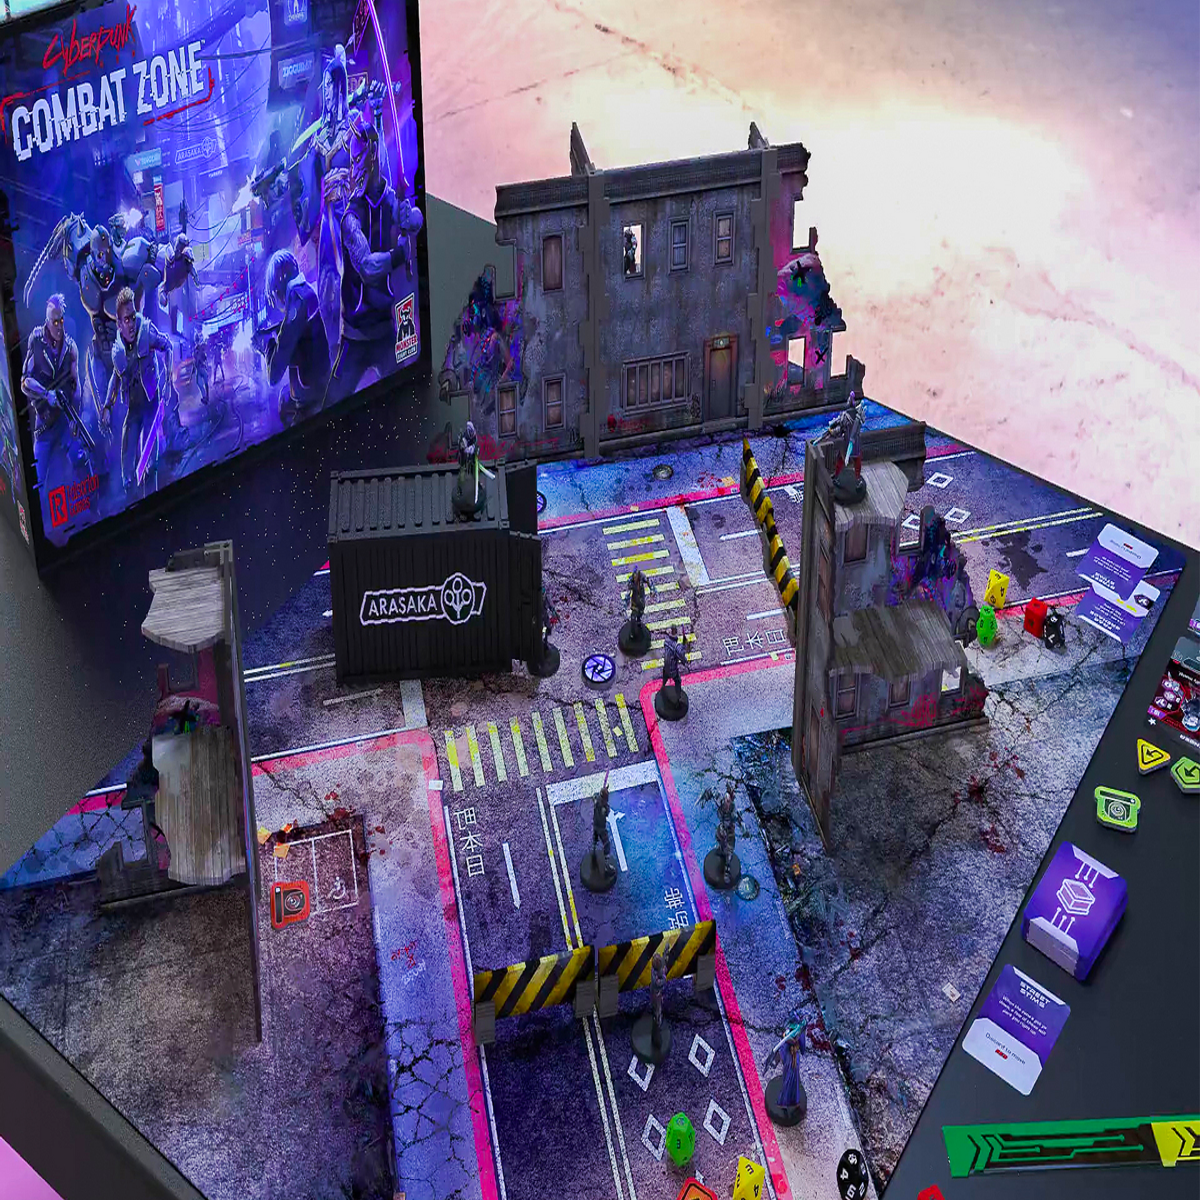 https://assetsio.reedpopcdn.com/cyberpunk-red-combat-zone-gameplay-layout-box.jpg?width=1200&height=1200&fit=crop&quality=100&format=png&enable=upscale&auto=webp